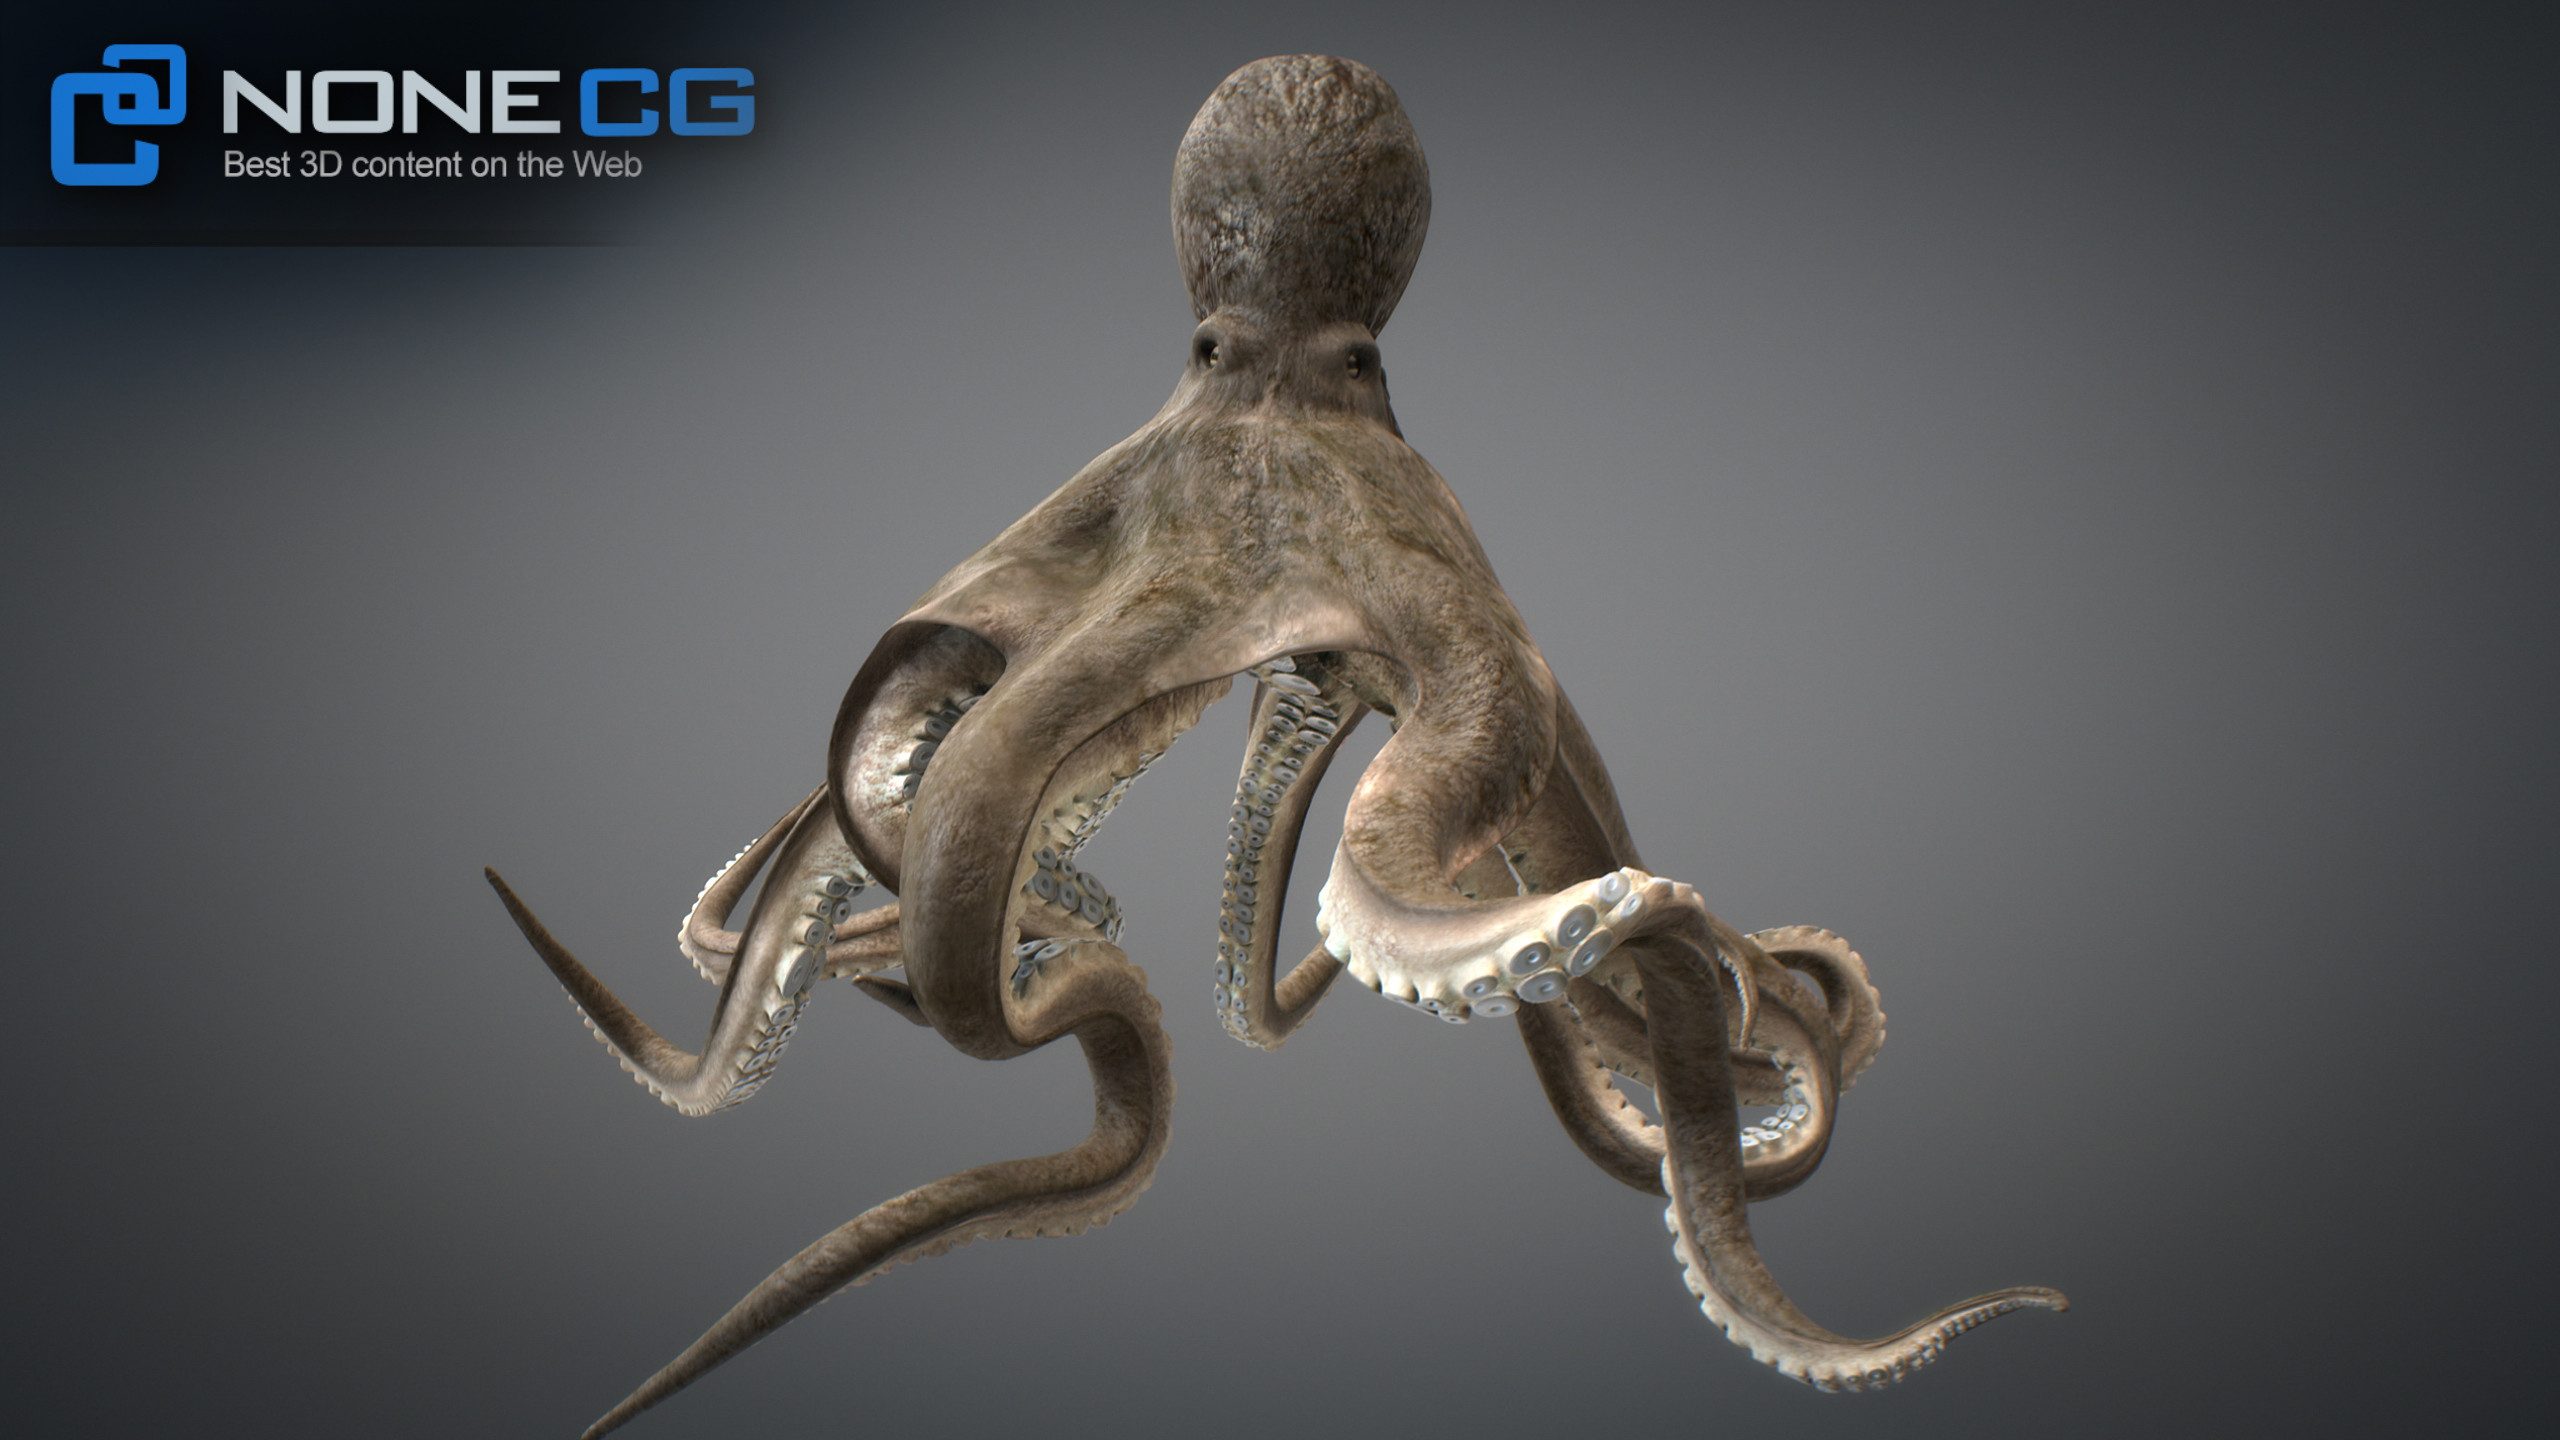 3D Octopus Animated